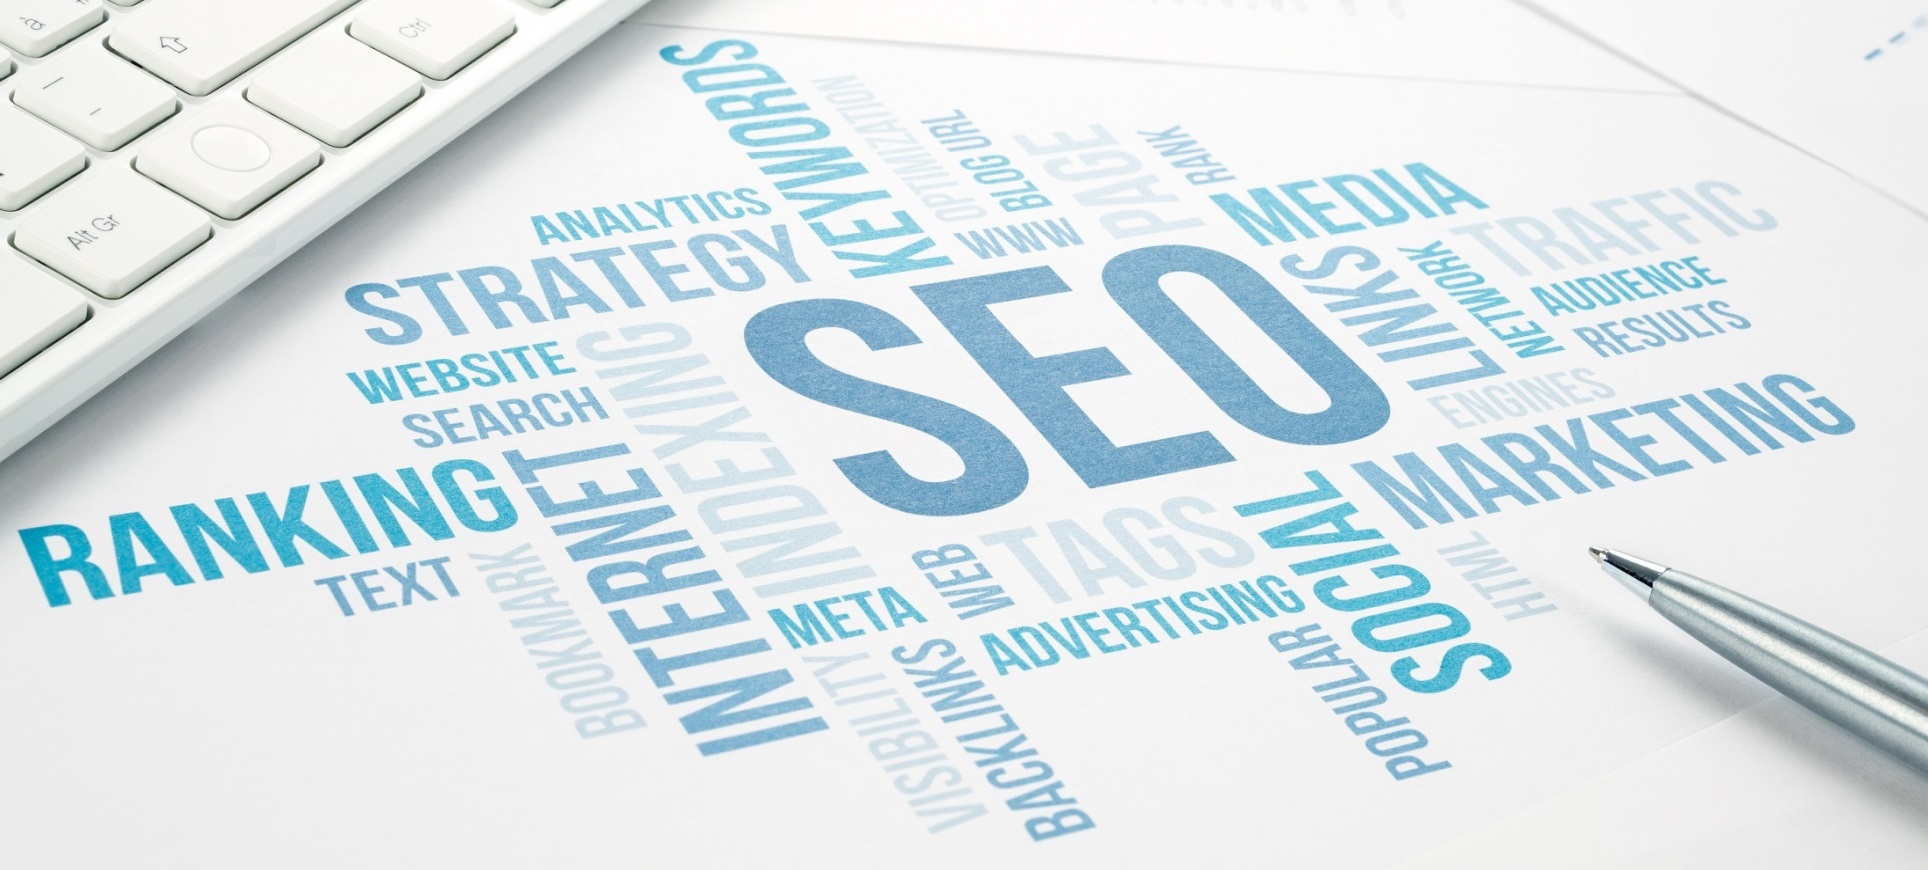 Your SEO Website Needs To Be Visible To Create An Impact!